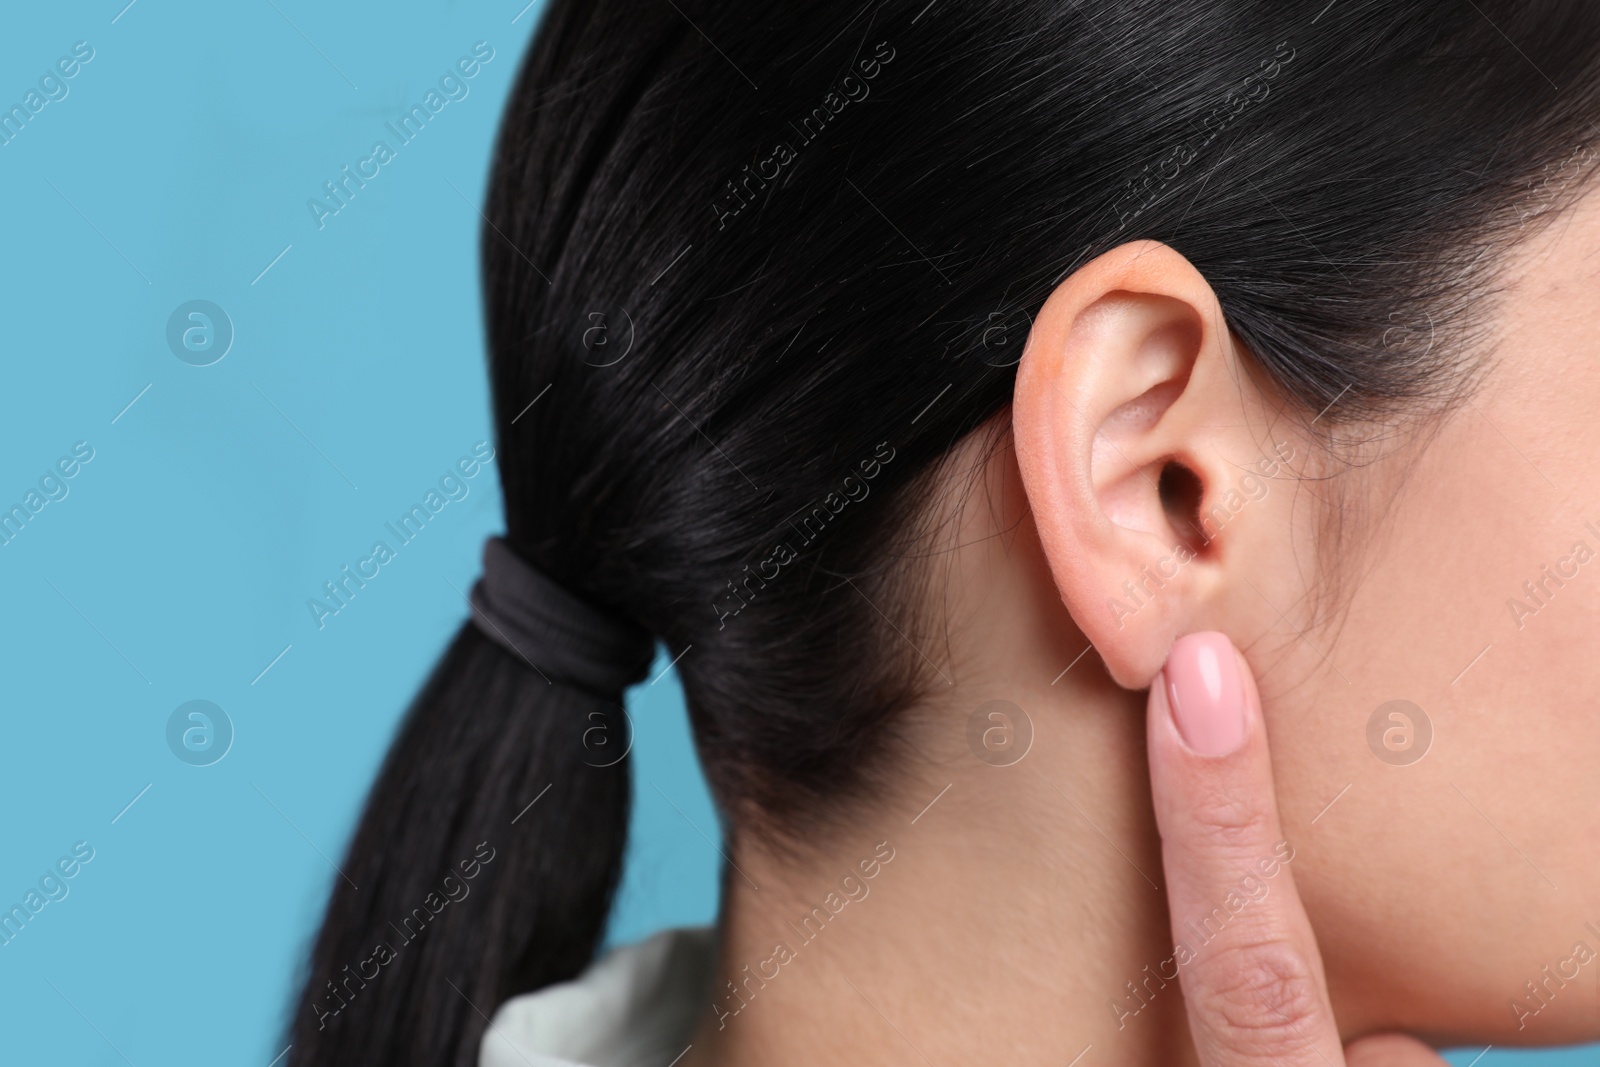 Photo of Woman pointing at her ear on light blue background, closeup